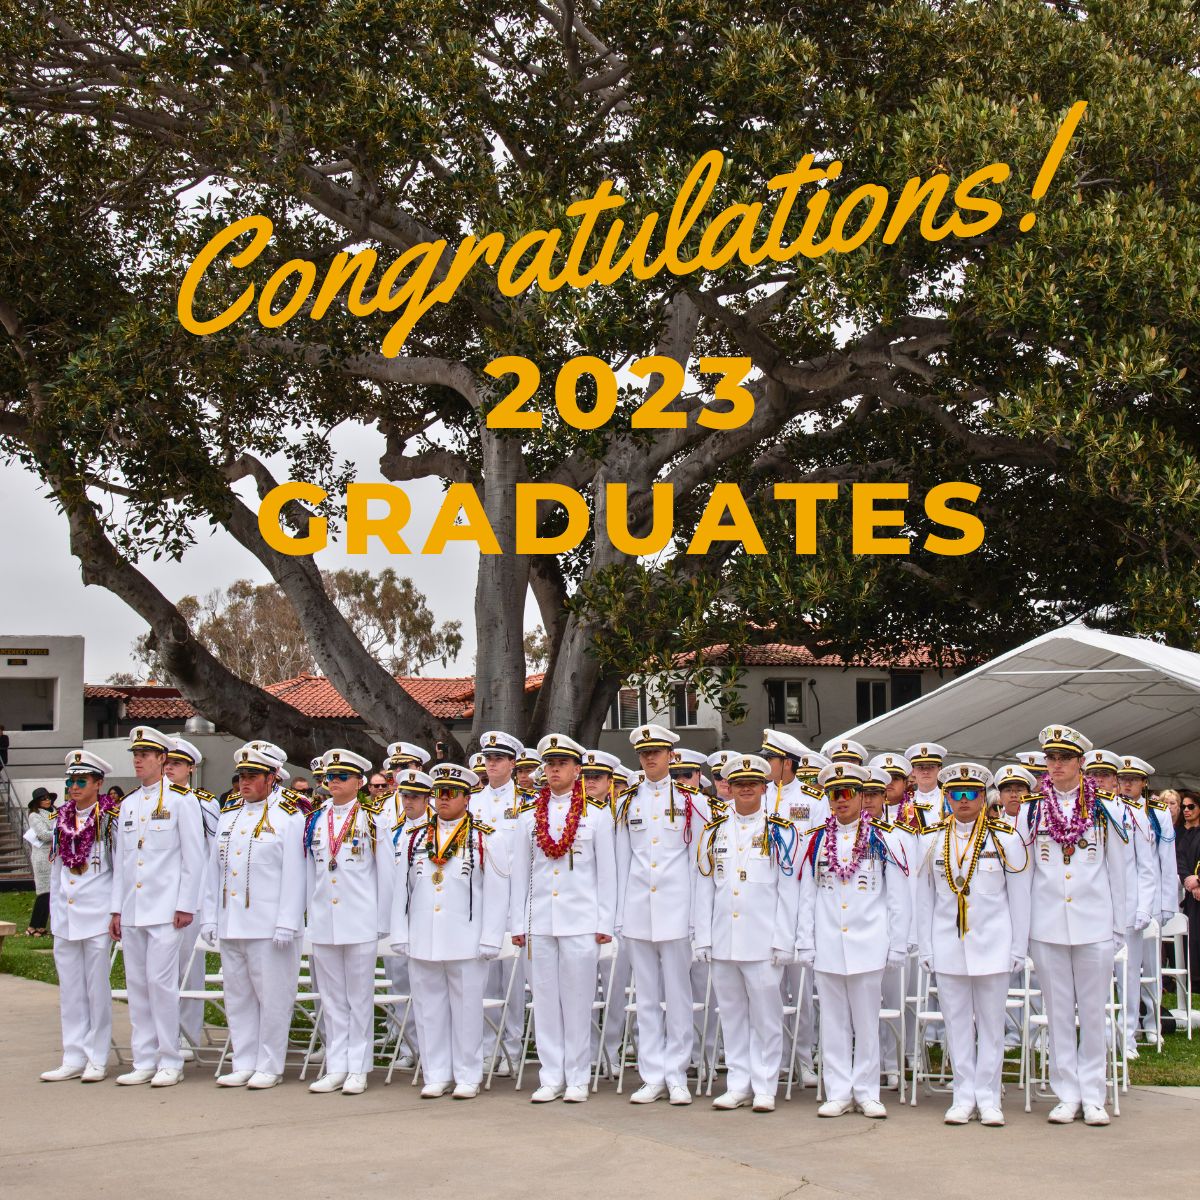 ANA class of 2023 was accepted to over 182 institutes of higher education and 21 cadets earned scholarships totaling $1,980,000!  We watch their next steps confident of their success because they have the heart of a Warrior.
#boardingschoollife#militaryacademy#classof2023